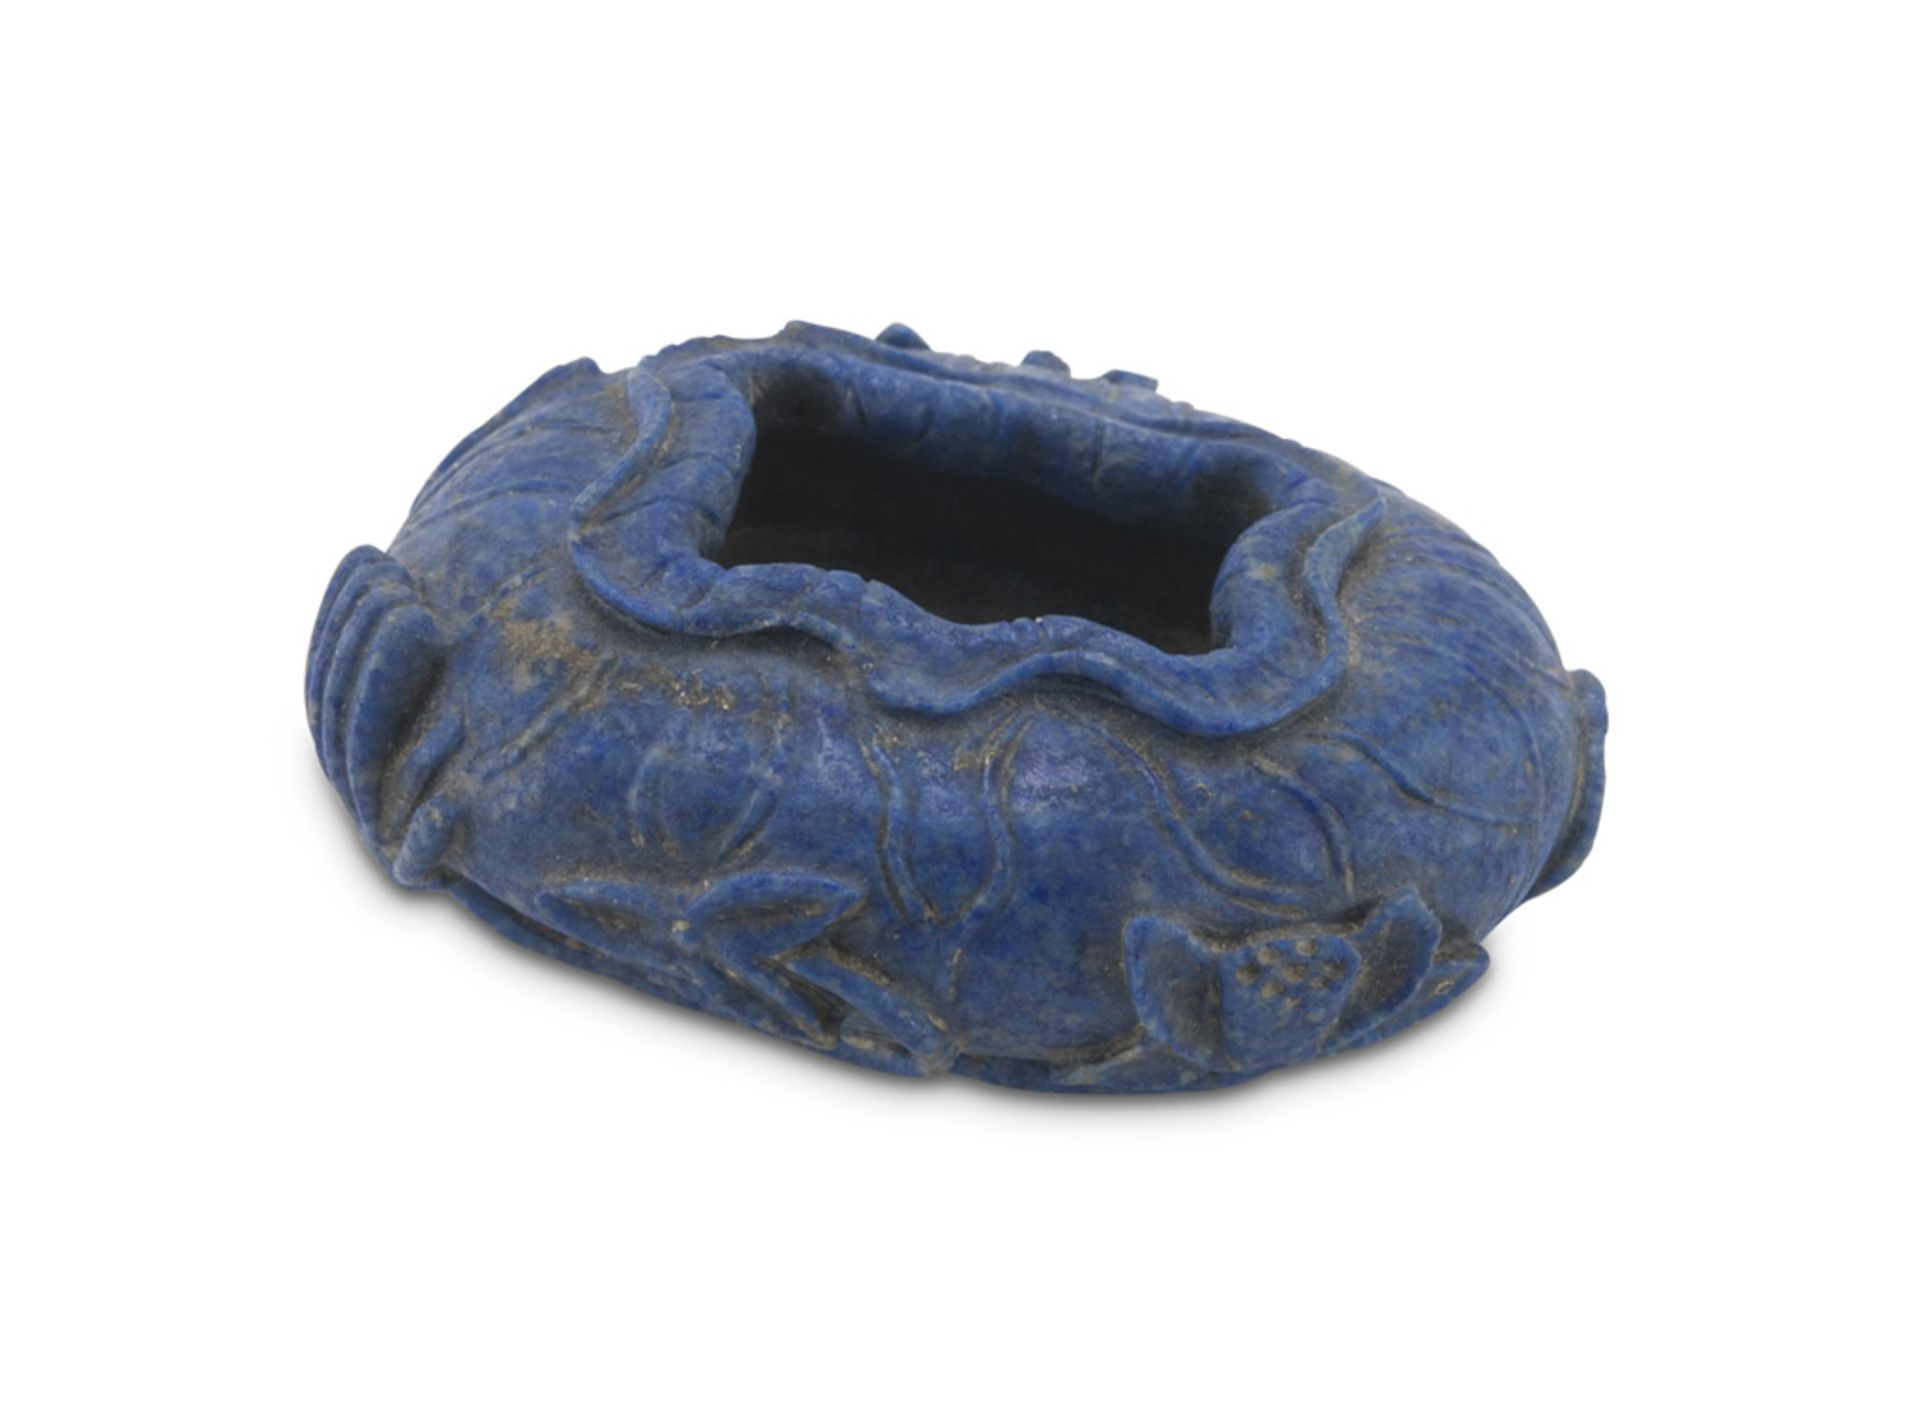 CENSER IN LAPIS LAZULI, EARLY 20TH CENTURY shaped as cocoon. Measures cm. 4 x 6,5 x 4. INCENSIERE